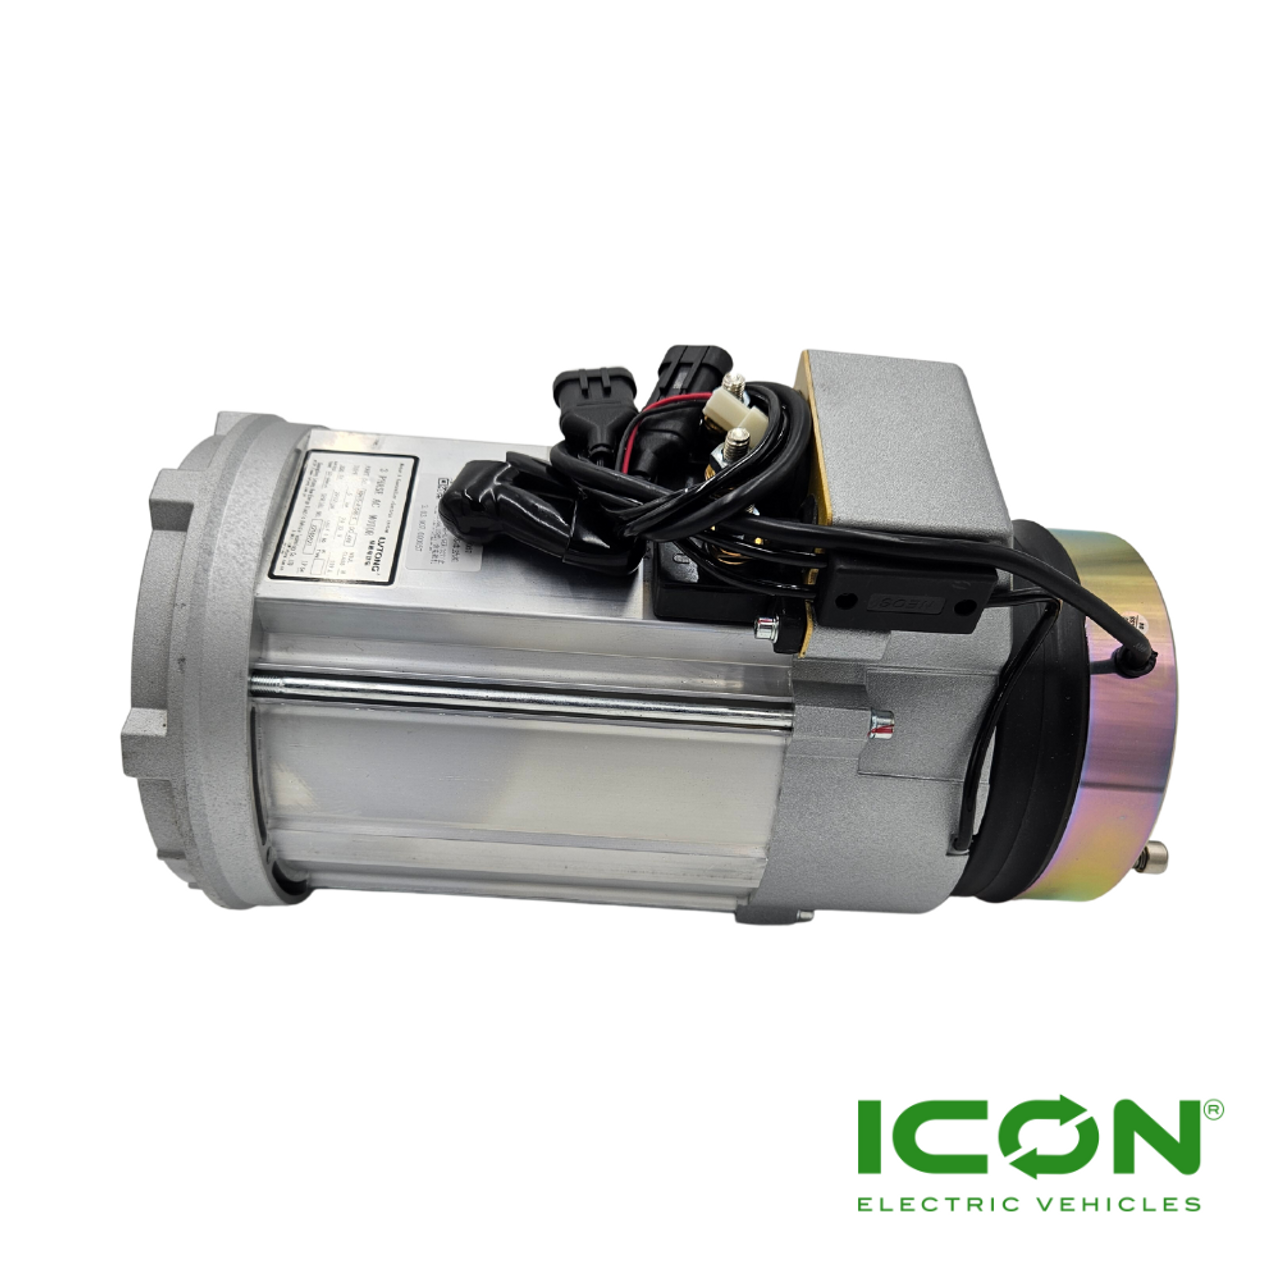 5KW AC Motor for ICON Golf Carts, MOTOR-702-IC, 3.03.007.000057, 3.202.07.000005